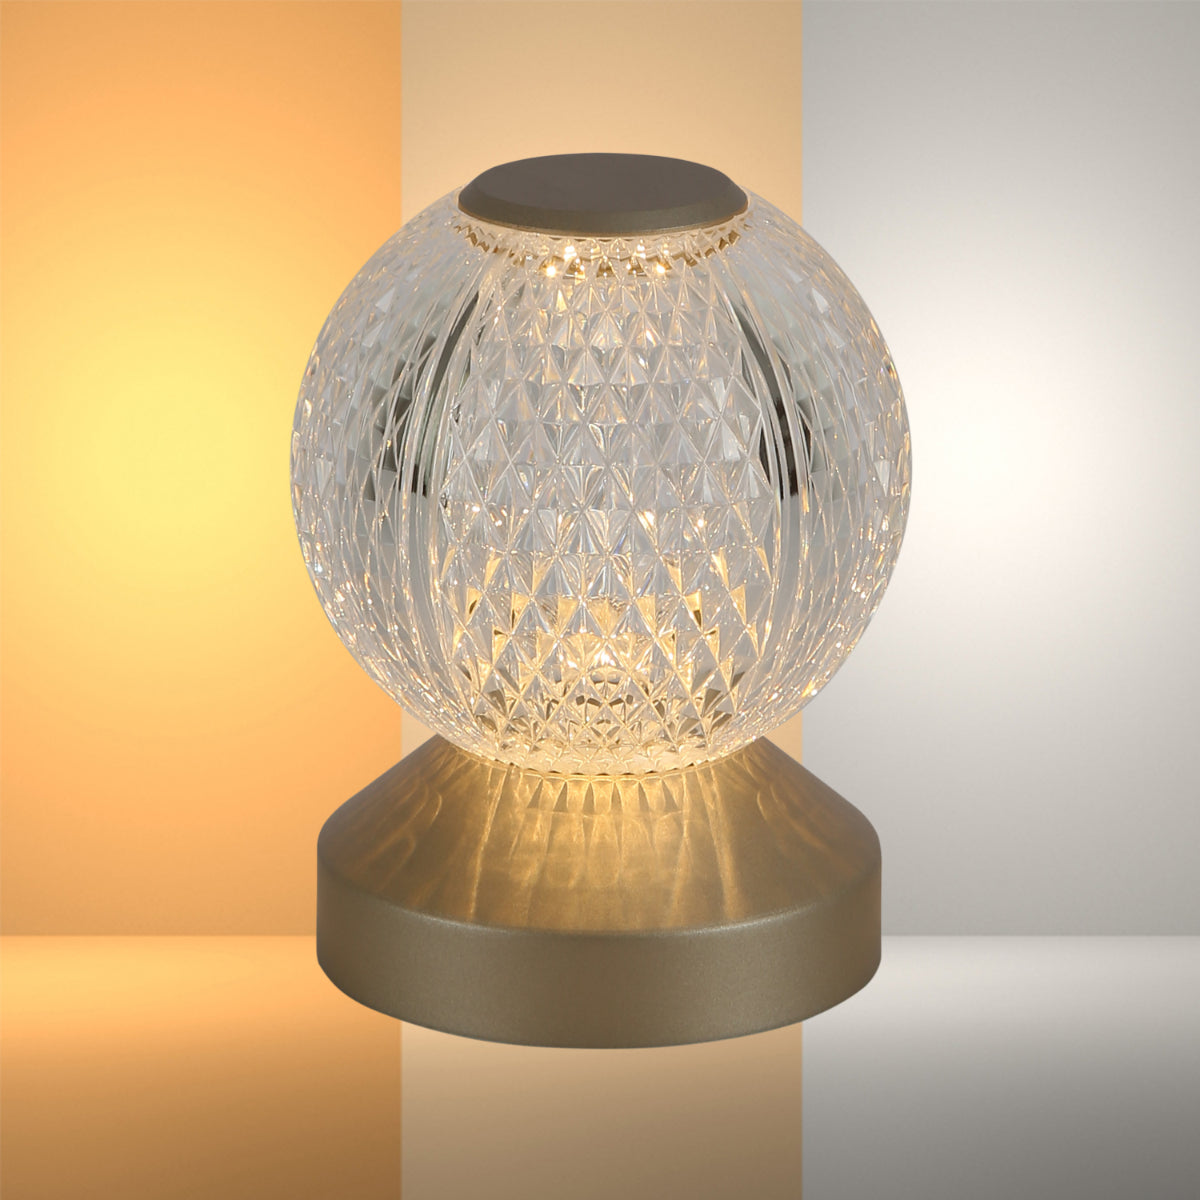 Main image of Illumina Sphere Touch: Rechargeable Spherical LED Lamp 130-03724